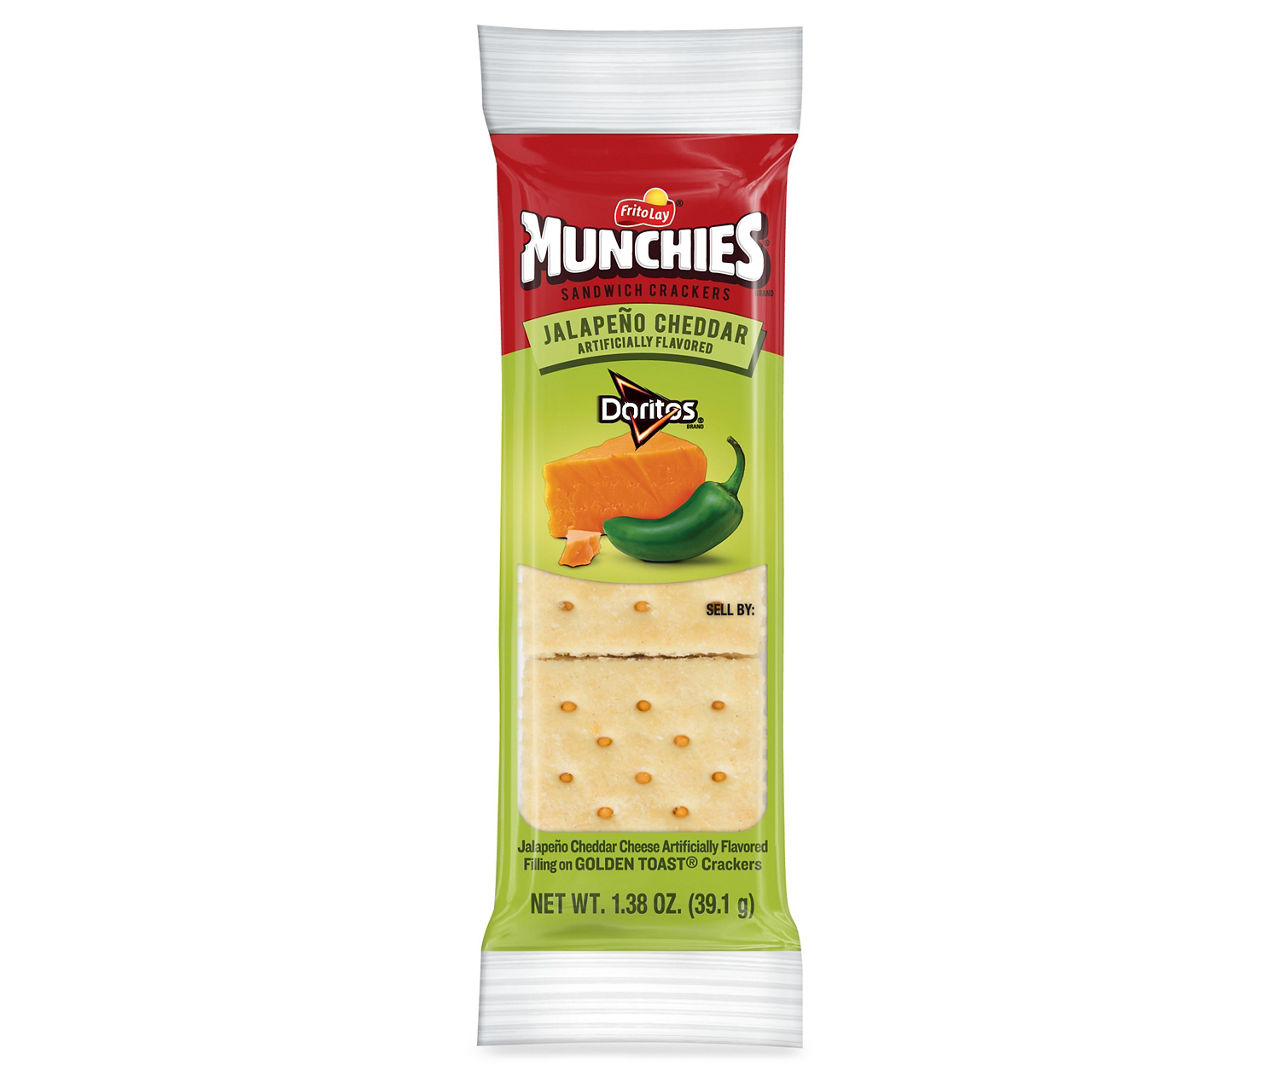 Just The Cheese Crunchy Toasted Cheese Snack Jalapeno, 12 - 2 Bar Packs -  Jay C Food Stores